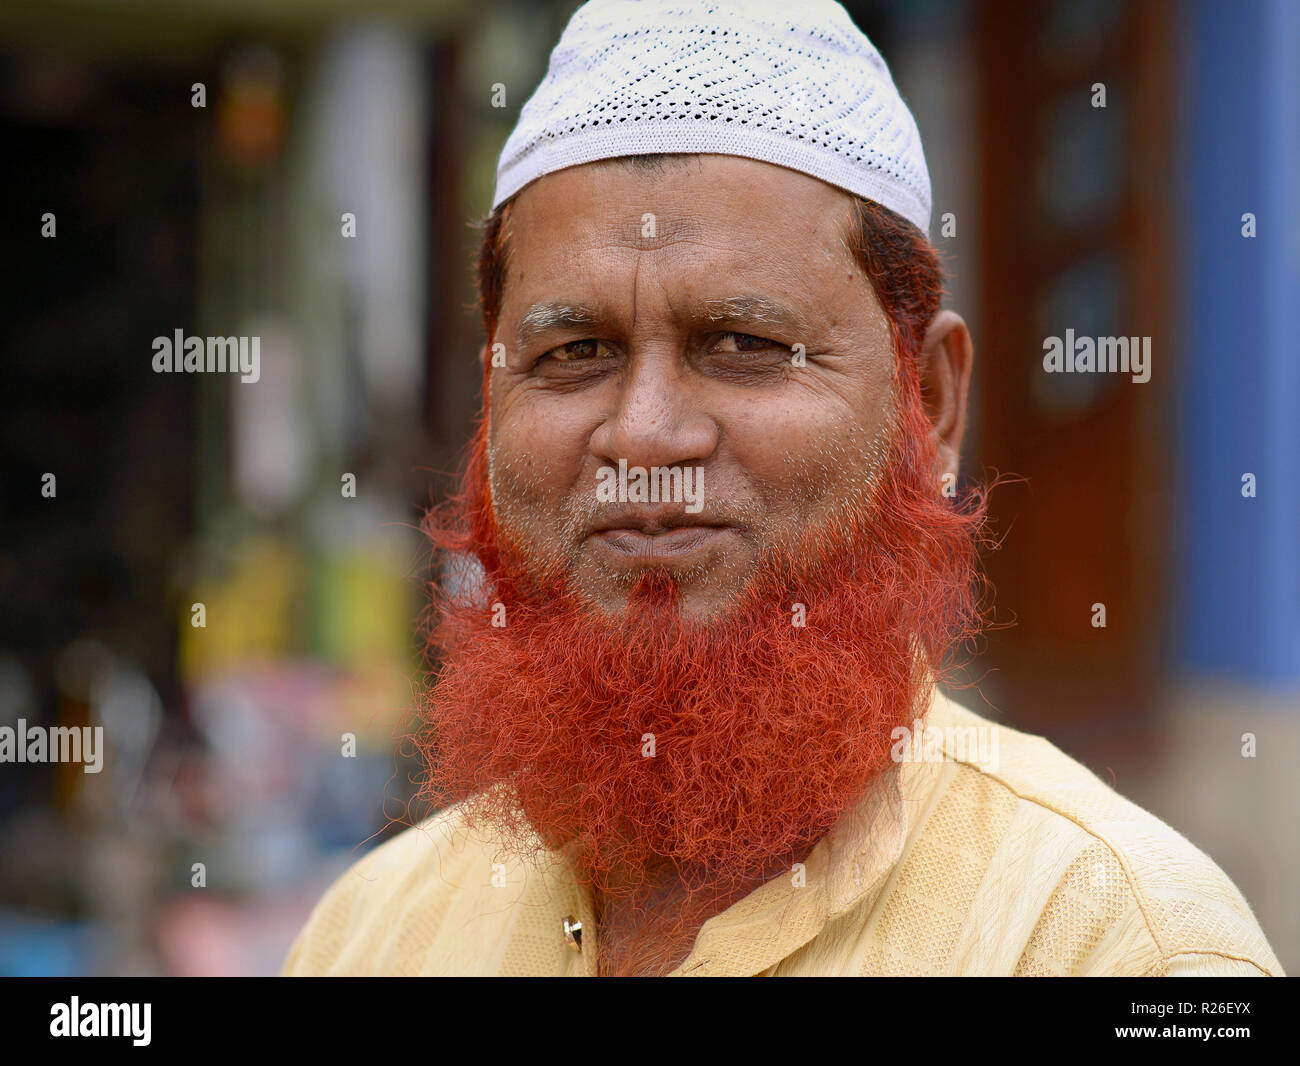 Elderly Indian Muslim man with henna-dyed Islamic beard wears a white  prayer cap (taqiyah) and smiles for the camera Stock Photo - Alamy